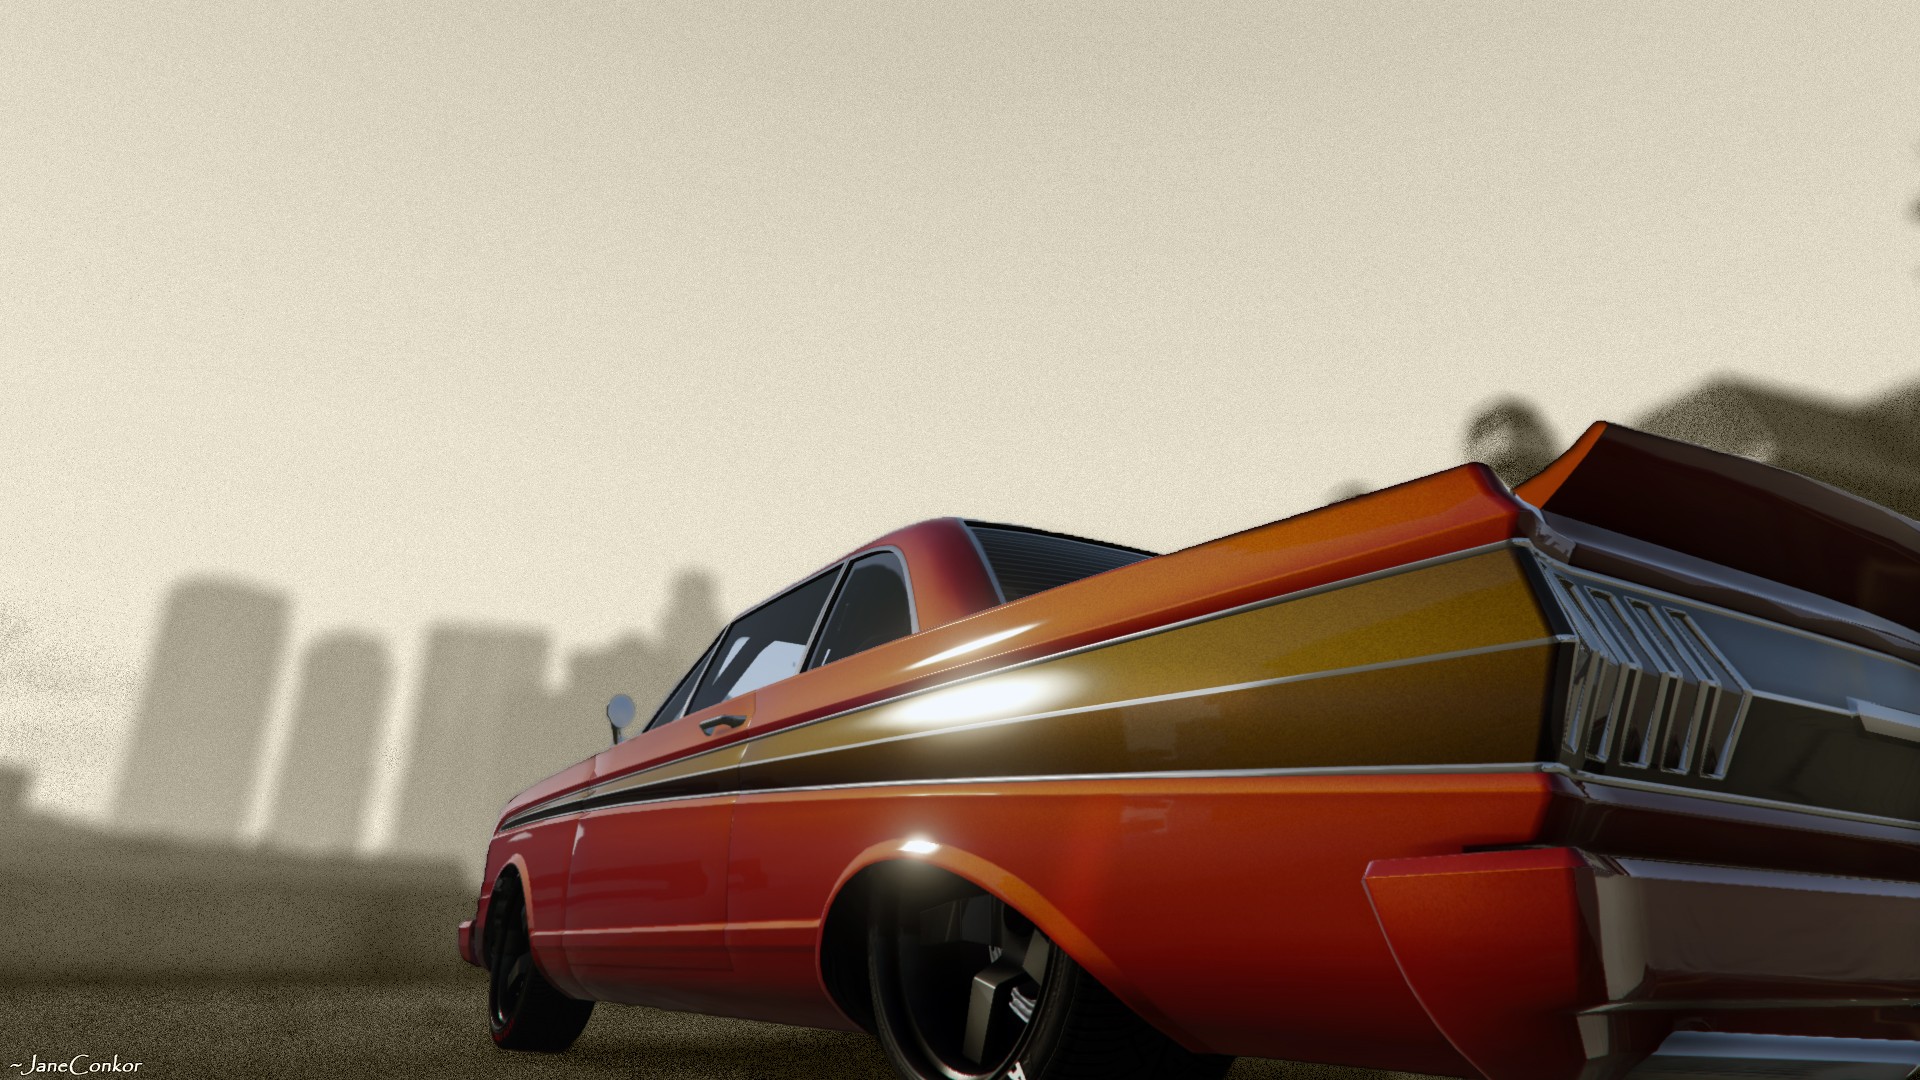 General 1920x1080 Grand Theft Auto V car photoshopped tuning vehicle red cars video games PC gaming